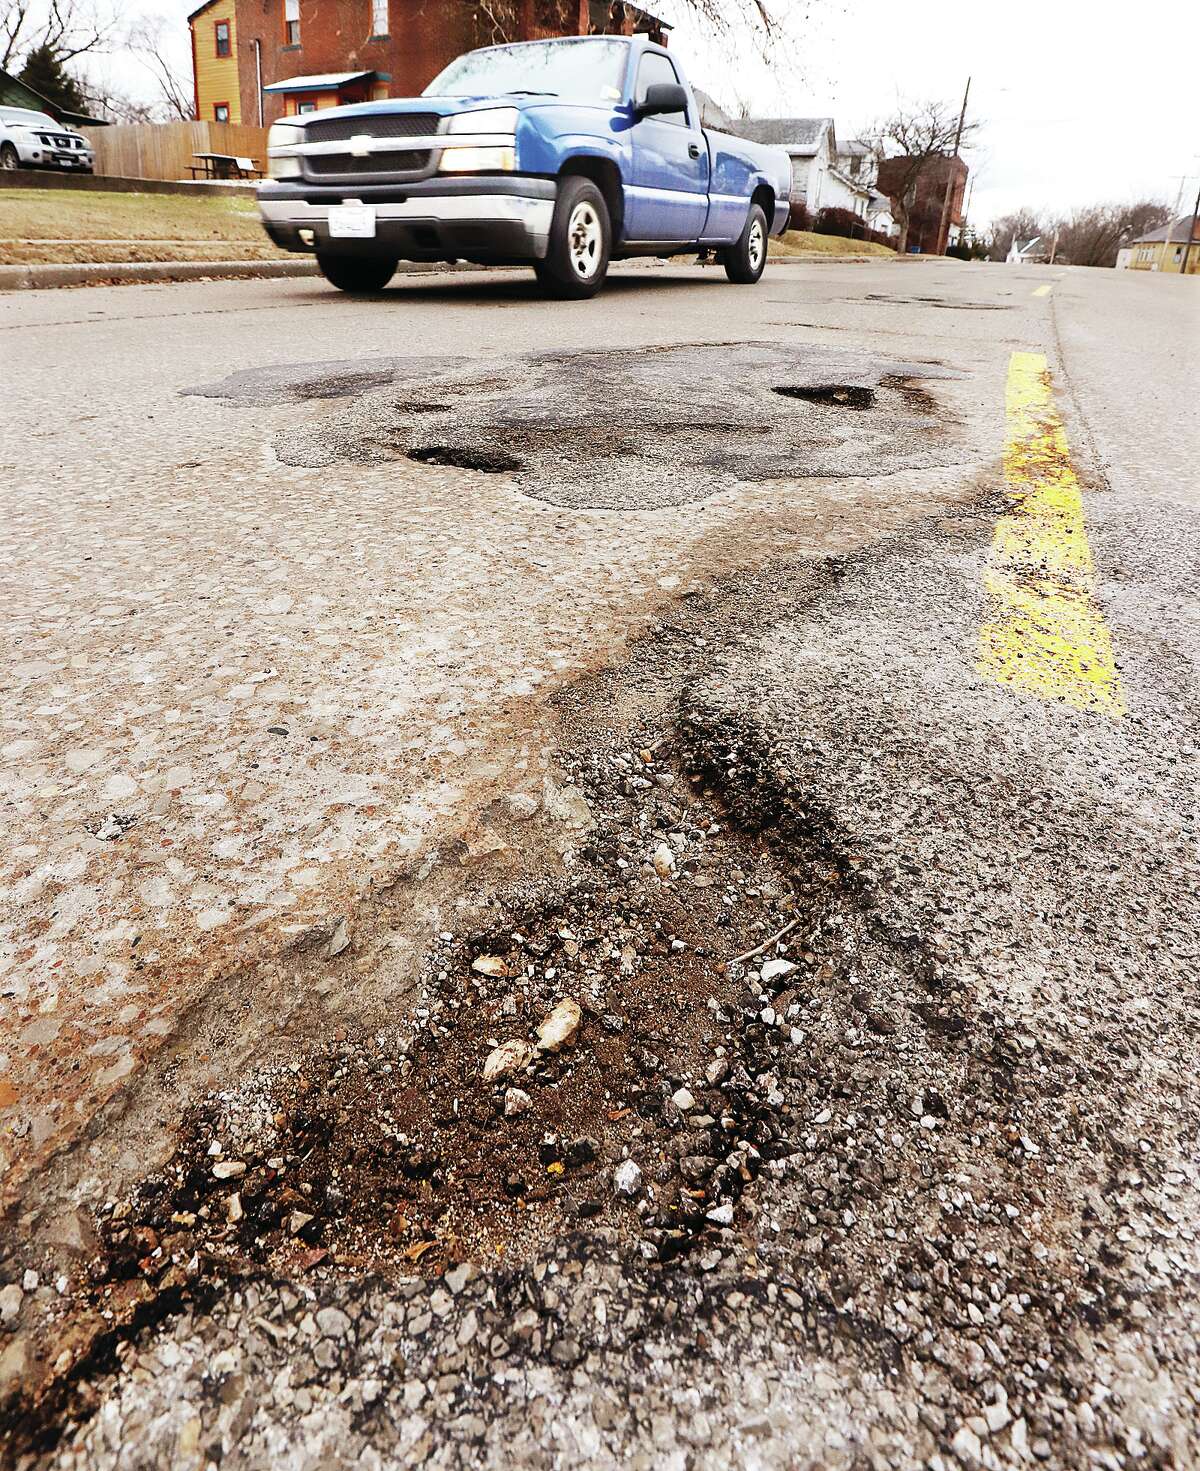 John Badman|The Telegraph A driver passes one of many potholes on Union Street near Liberty Street in Alton Friday. The annual abundance of potholes has not gone unnoticed by road crews trying to prevent them from getting any worse. Crews from both the City of Alton and Illinois Department of Transportation were out patching streets and highways Friday while the weather remained above freezing and dry.